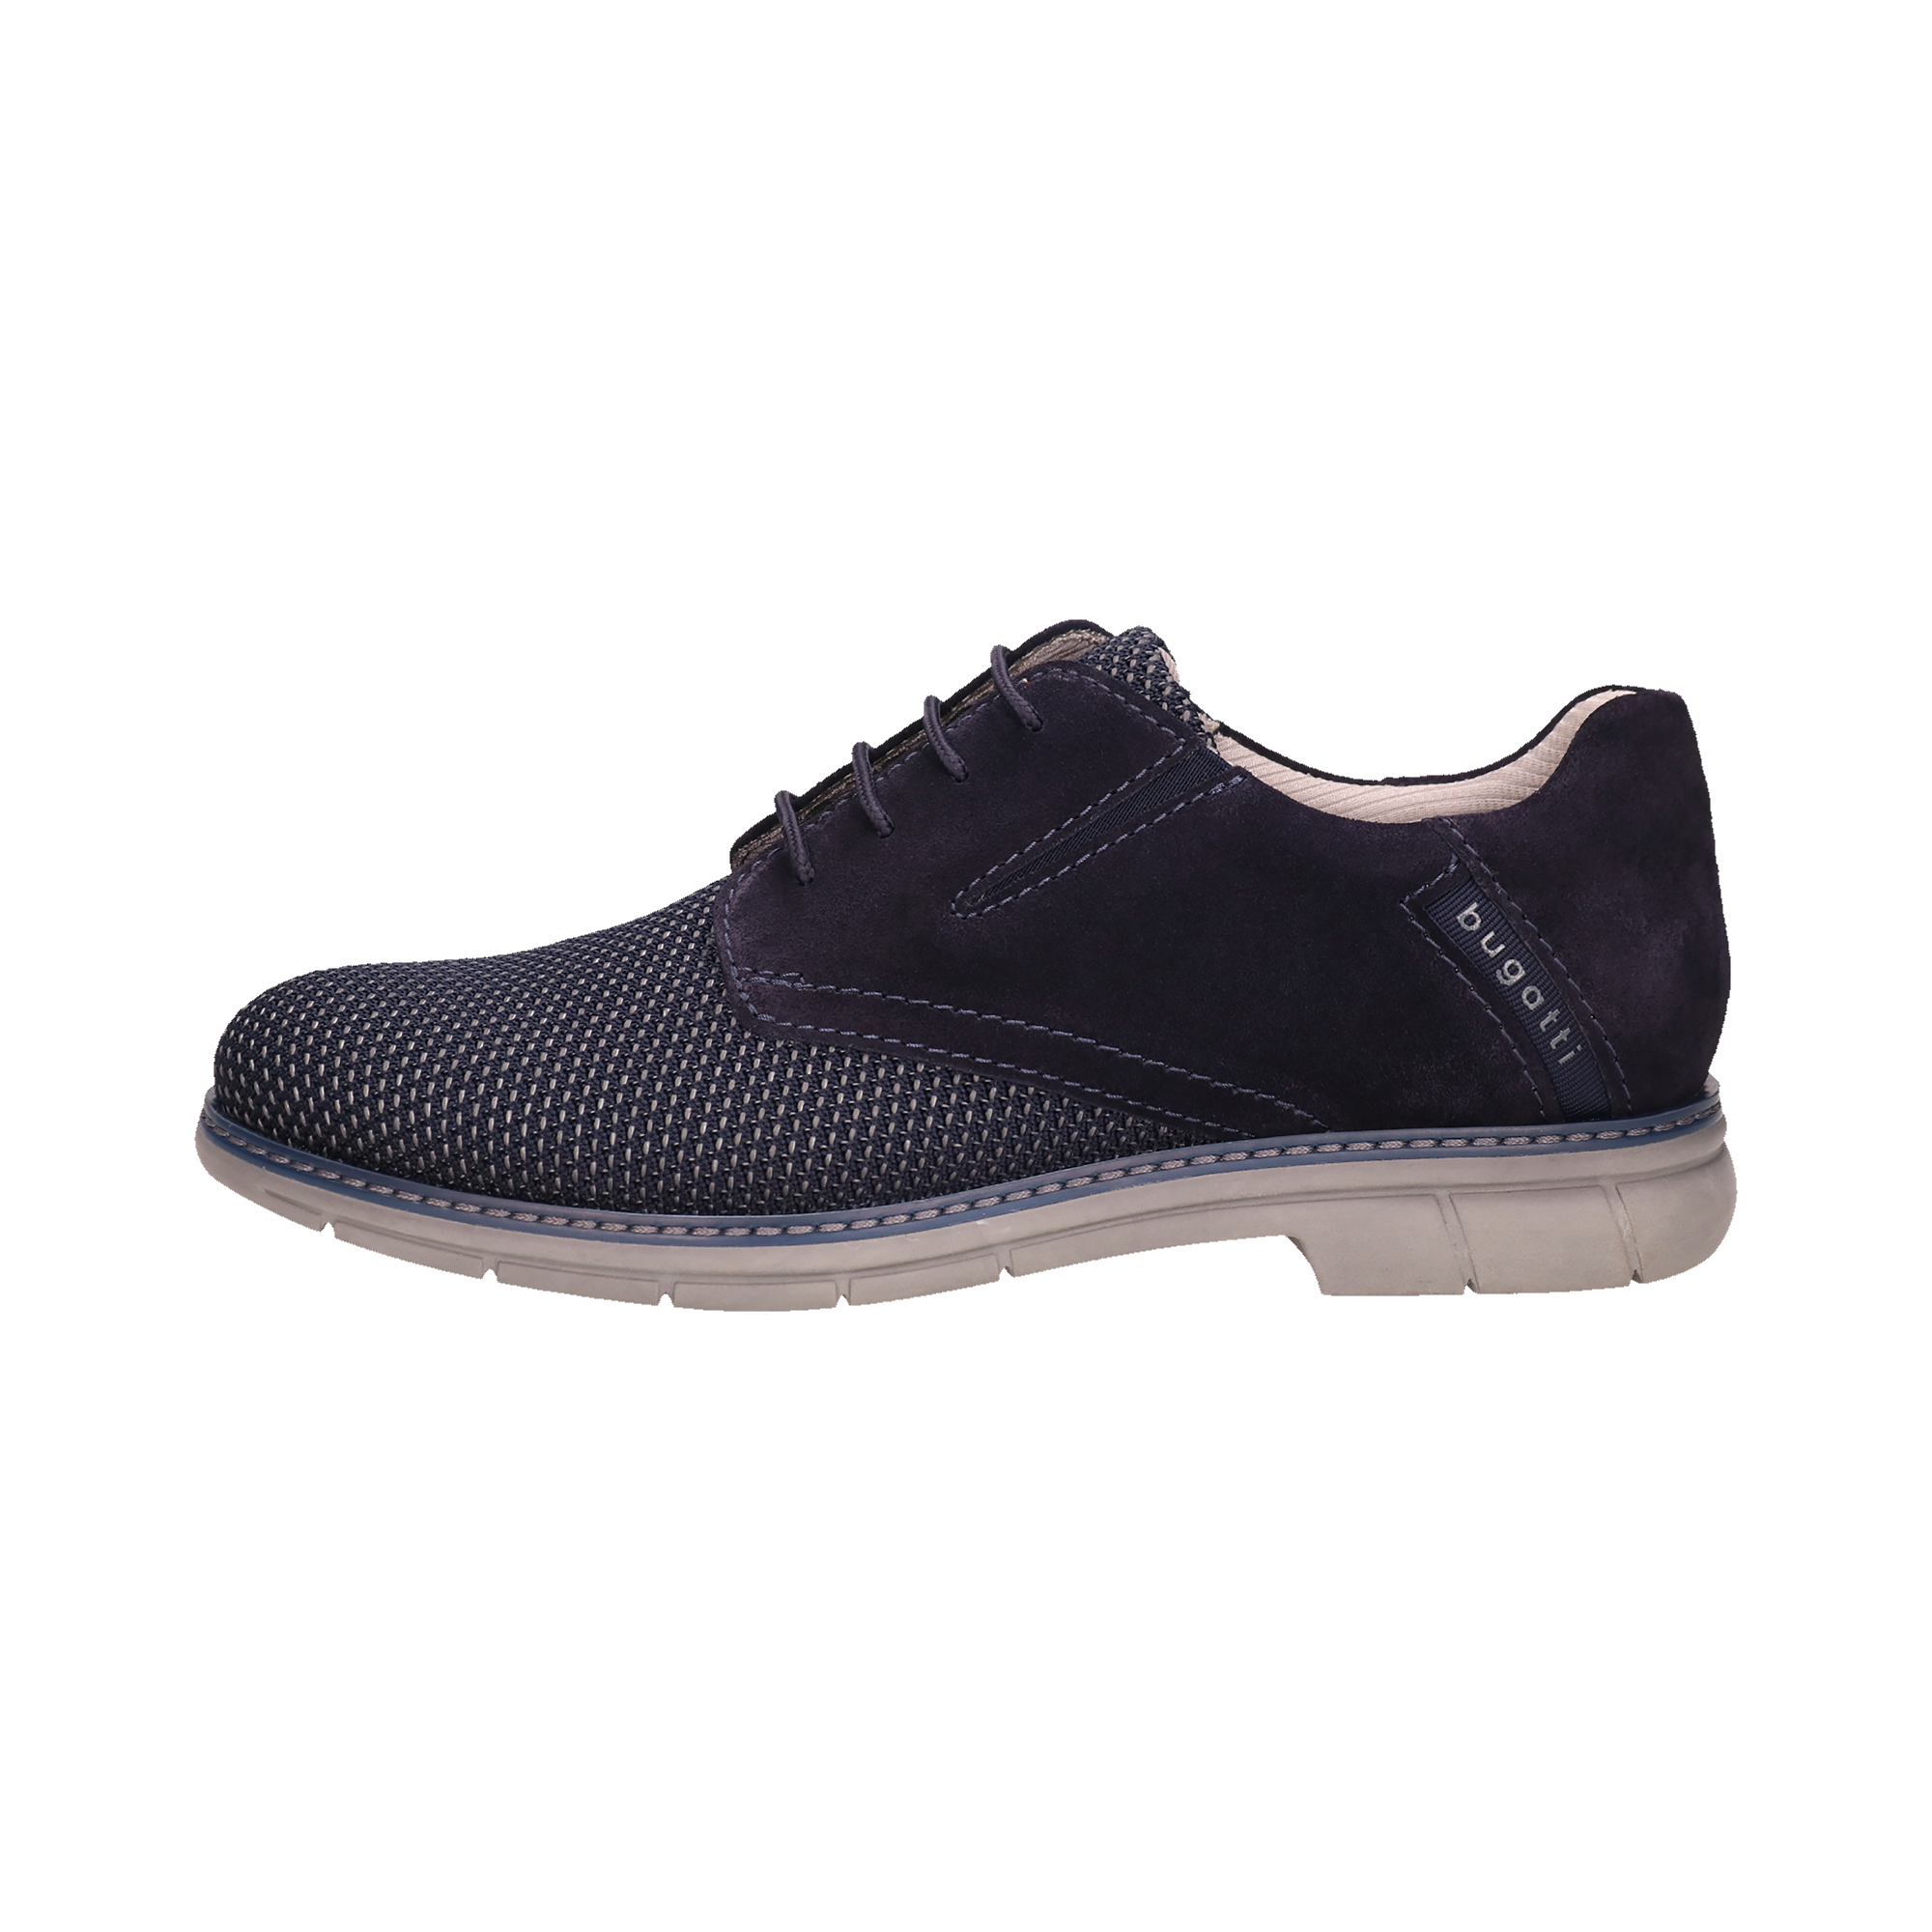 Leather lace-up dark blue